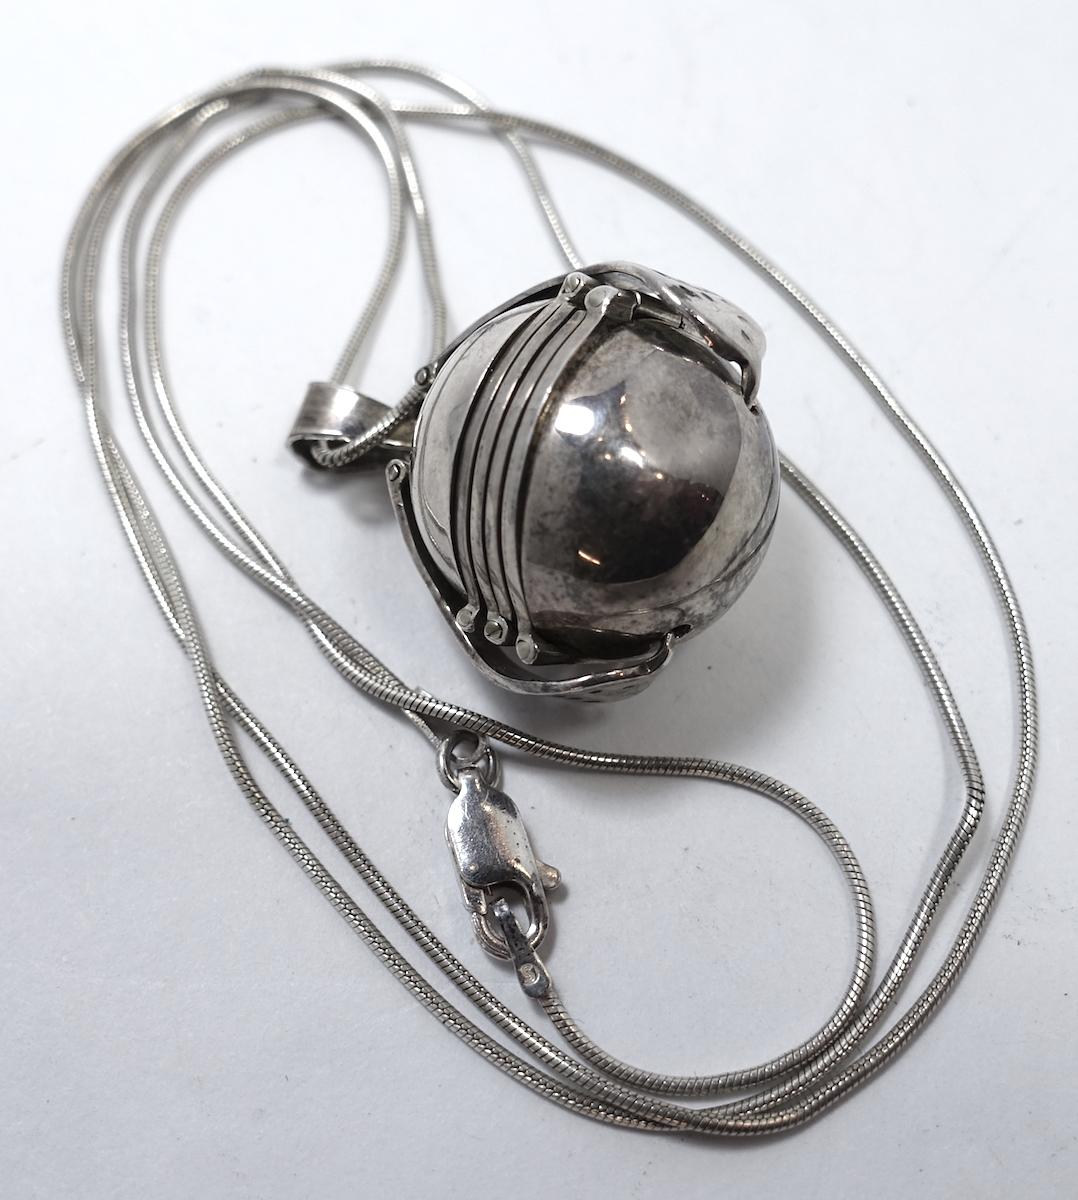 This vintage Art Deco photo locket holds 6 photos in a sterling silver setting.  The locket measures 3/4” x 7/8” and has two side clips.  It has a snake chain that is 22” x 1/16” with a spring clasp.  It has a “Taxco, Mexico” logo and is in